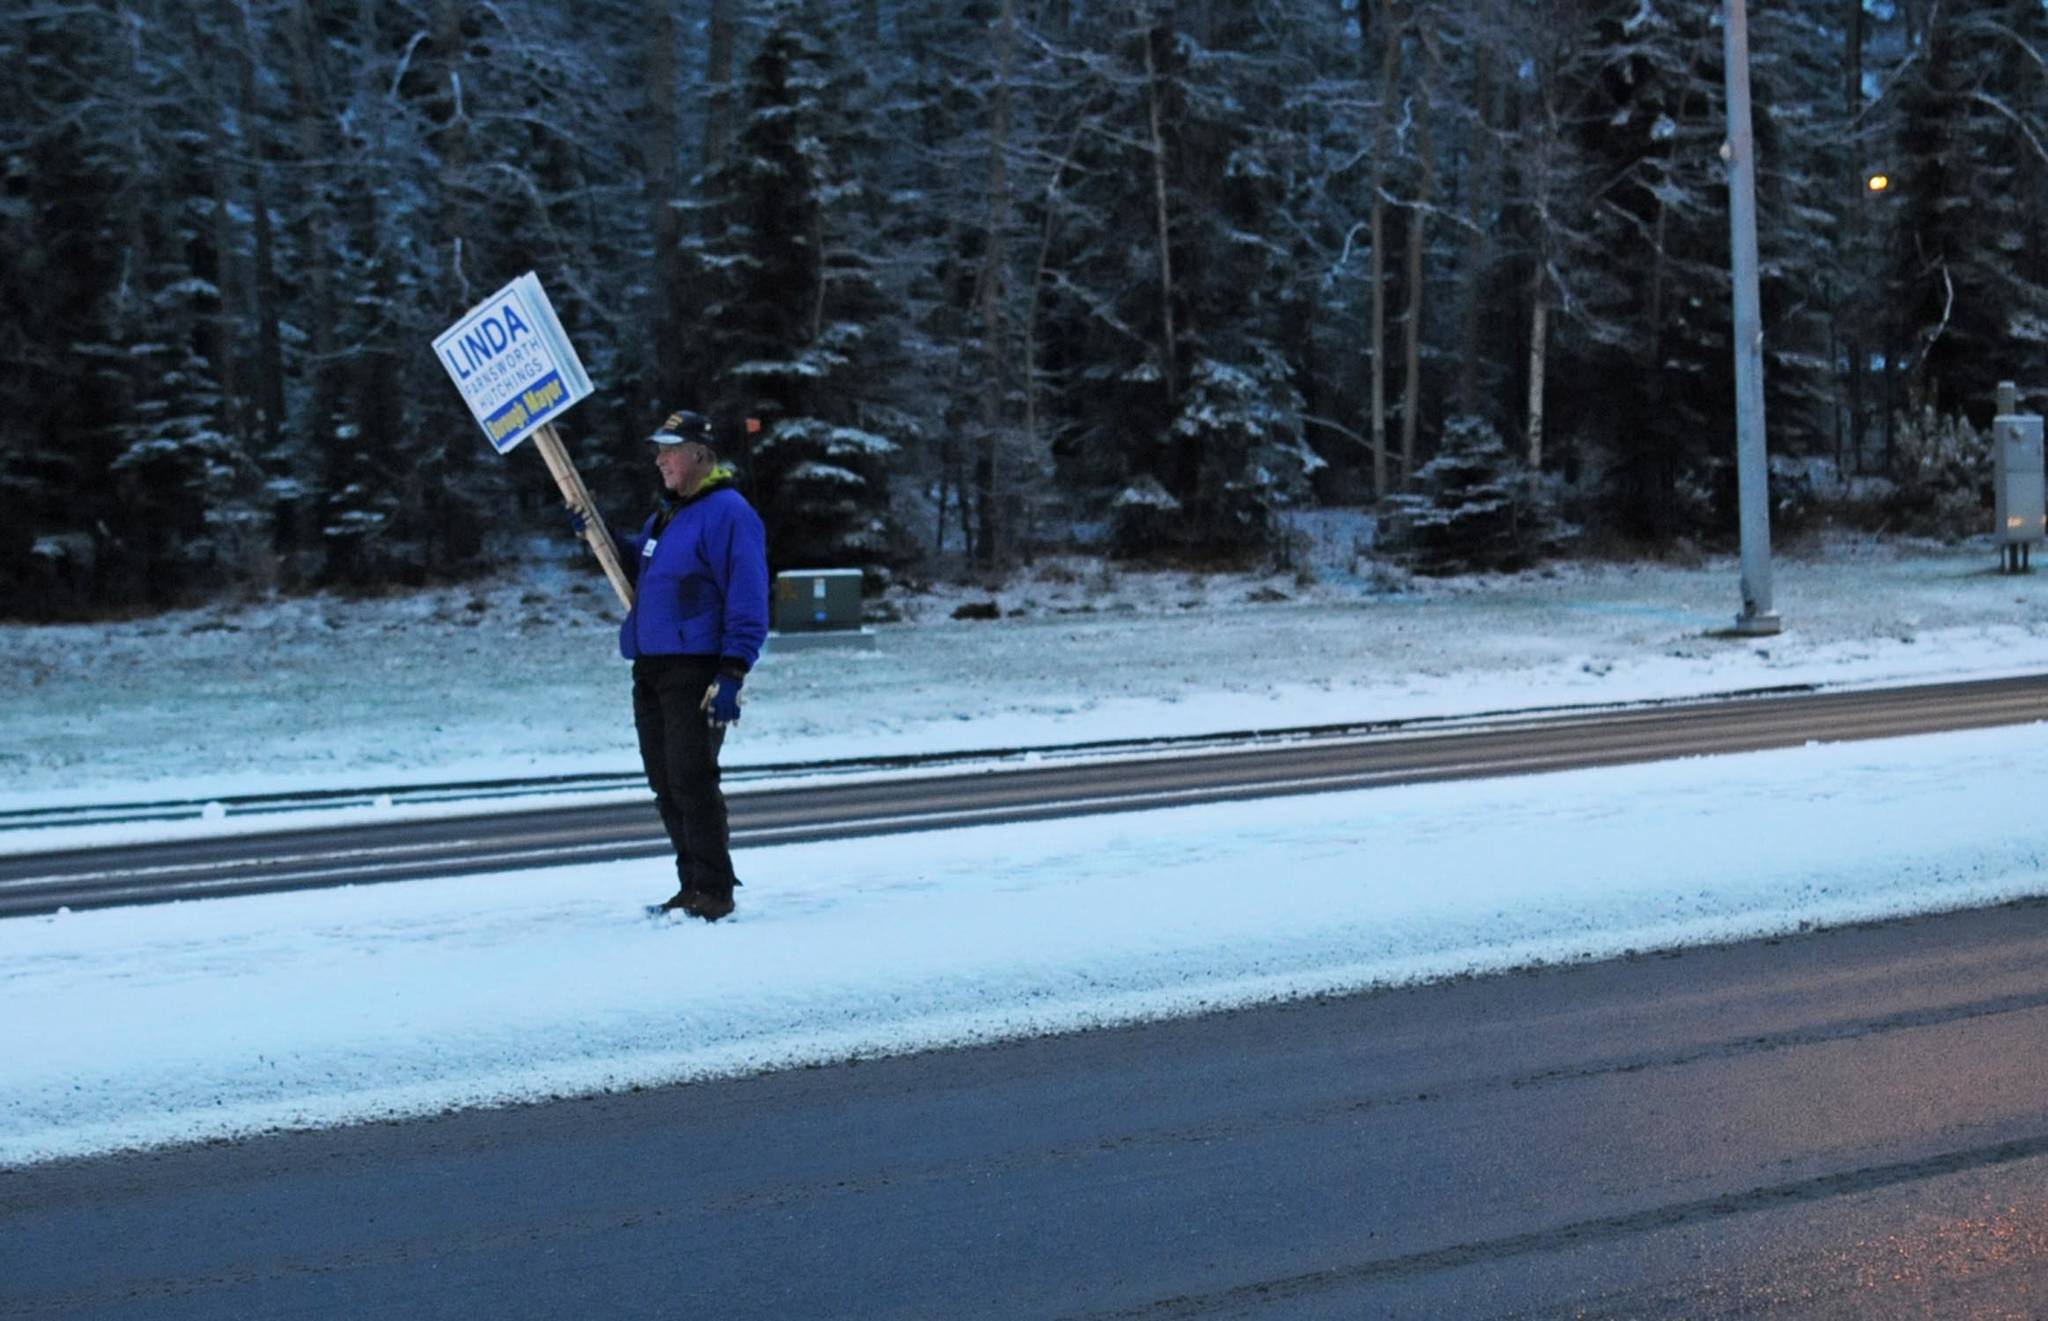 A man waves a sign supporting Kenai Peninsula Borough mayoral candidate Linda Hutchings from the median on the Sterling Highway near the intersection with the Kenai Spur Highway on Tuesday, Oct. 24, 2017 in Soldotna, Alaska. Kenai Peninsula voters chose between Hutchings and candidate Charlie Pierce in the mayoral runoff election Tuesday. (Photo by Elizabeth Earl/Peninsula Clarion)